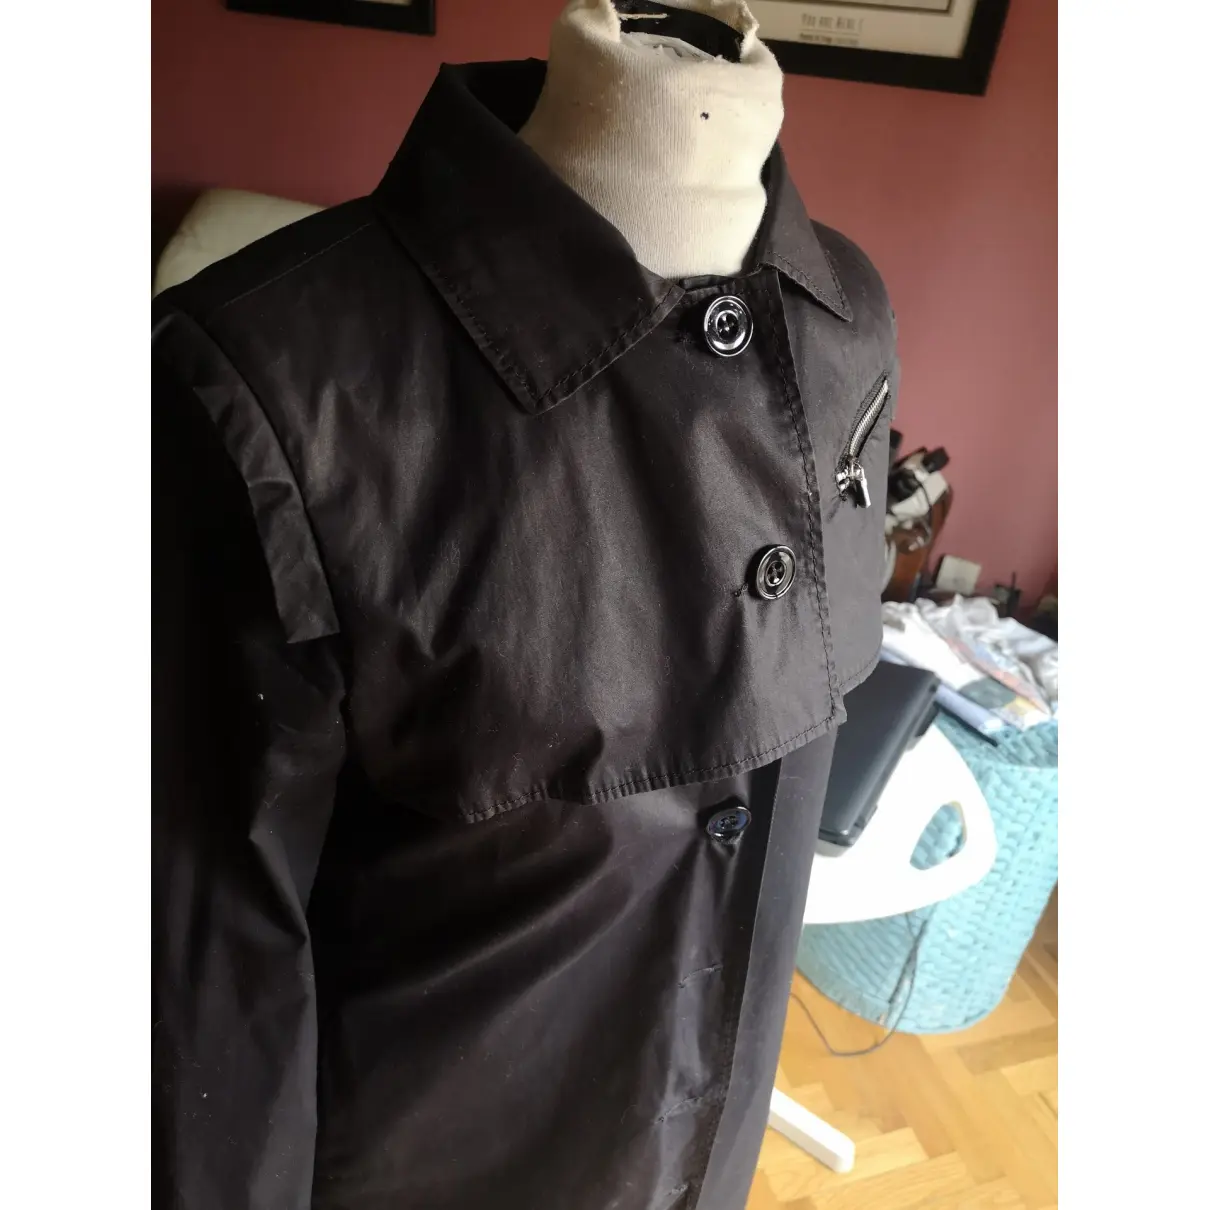 Buy Armani Jeans Trench coat online